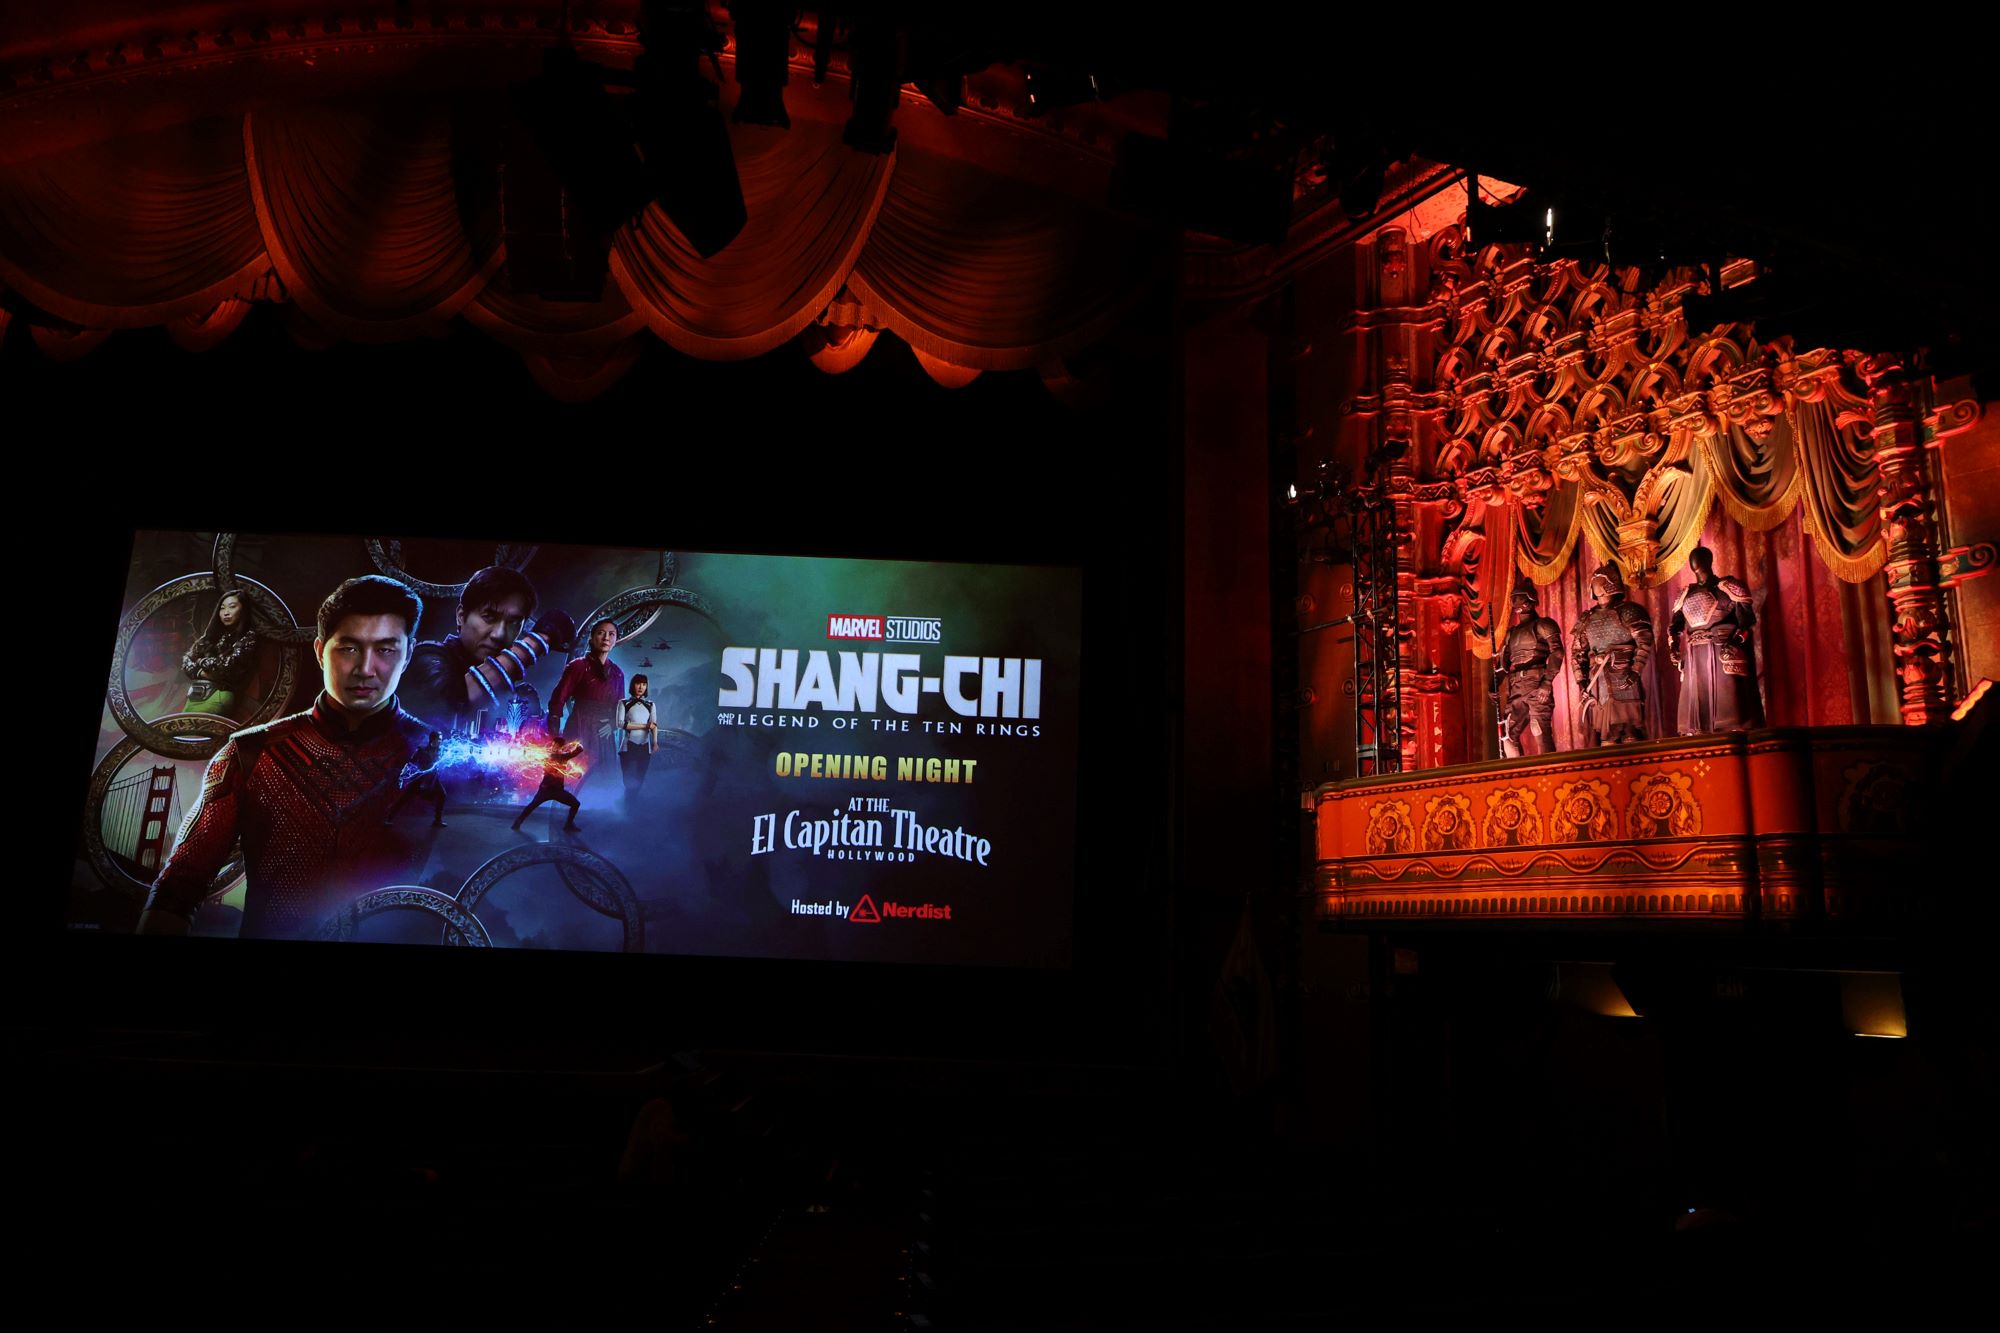 'Shang-Chi and The Legend Of The Ten Ring' projected on the screen in a theater with costumes displayed on the right.